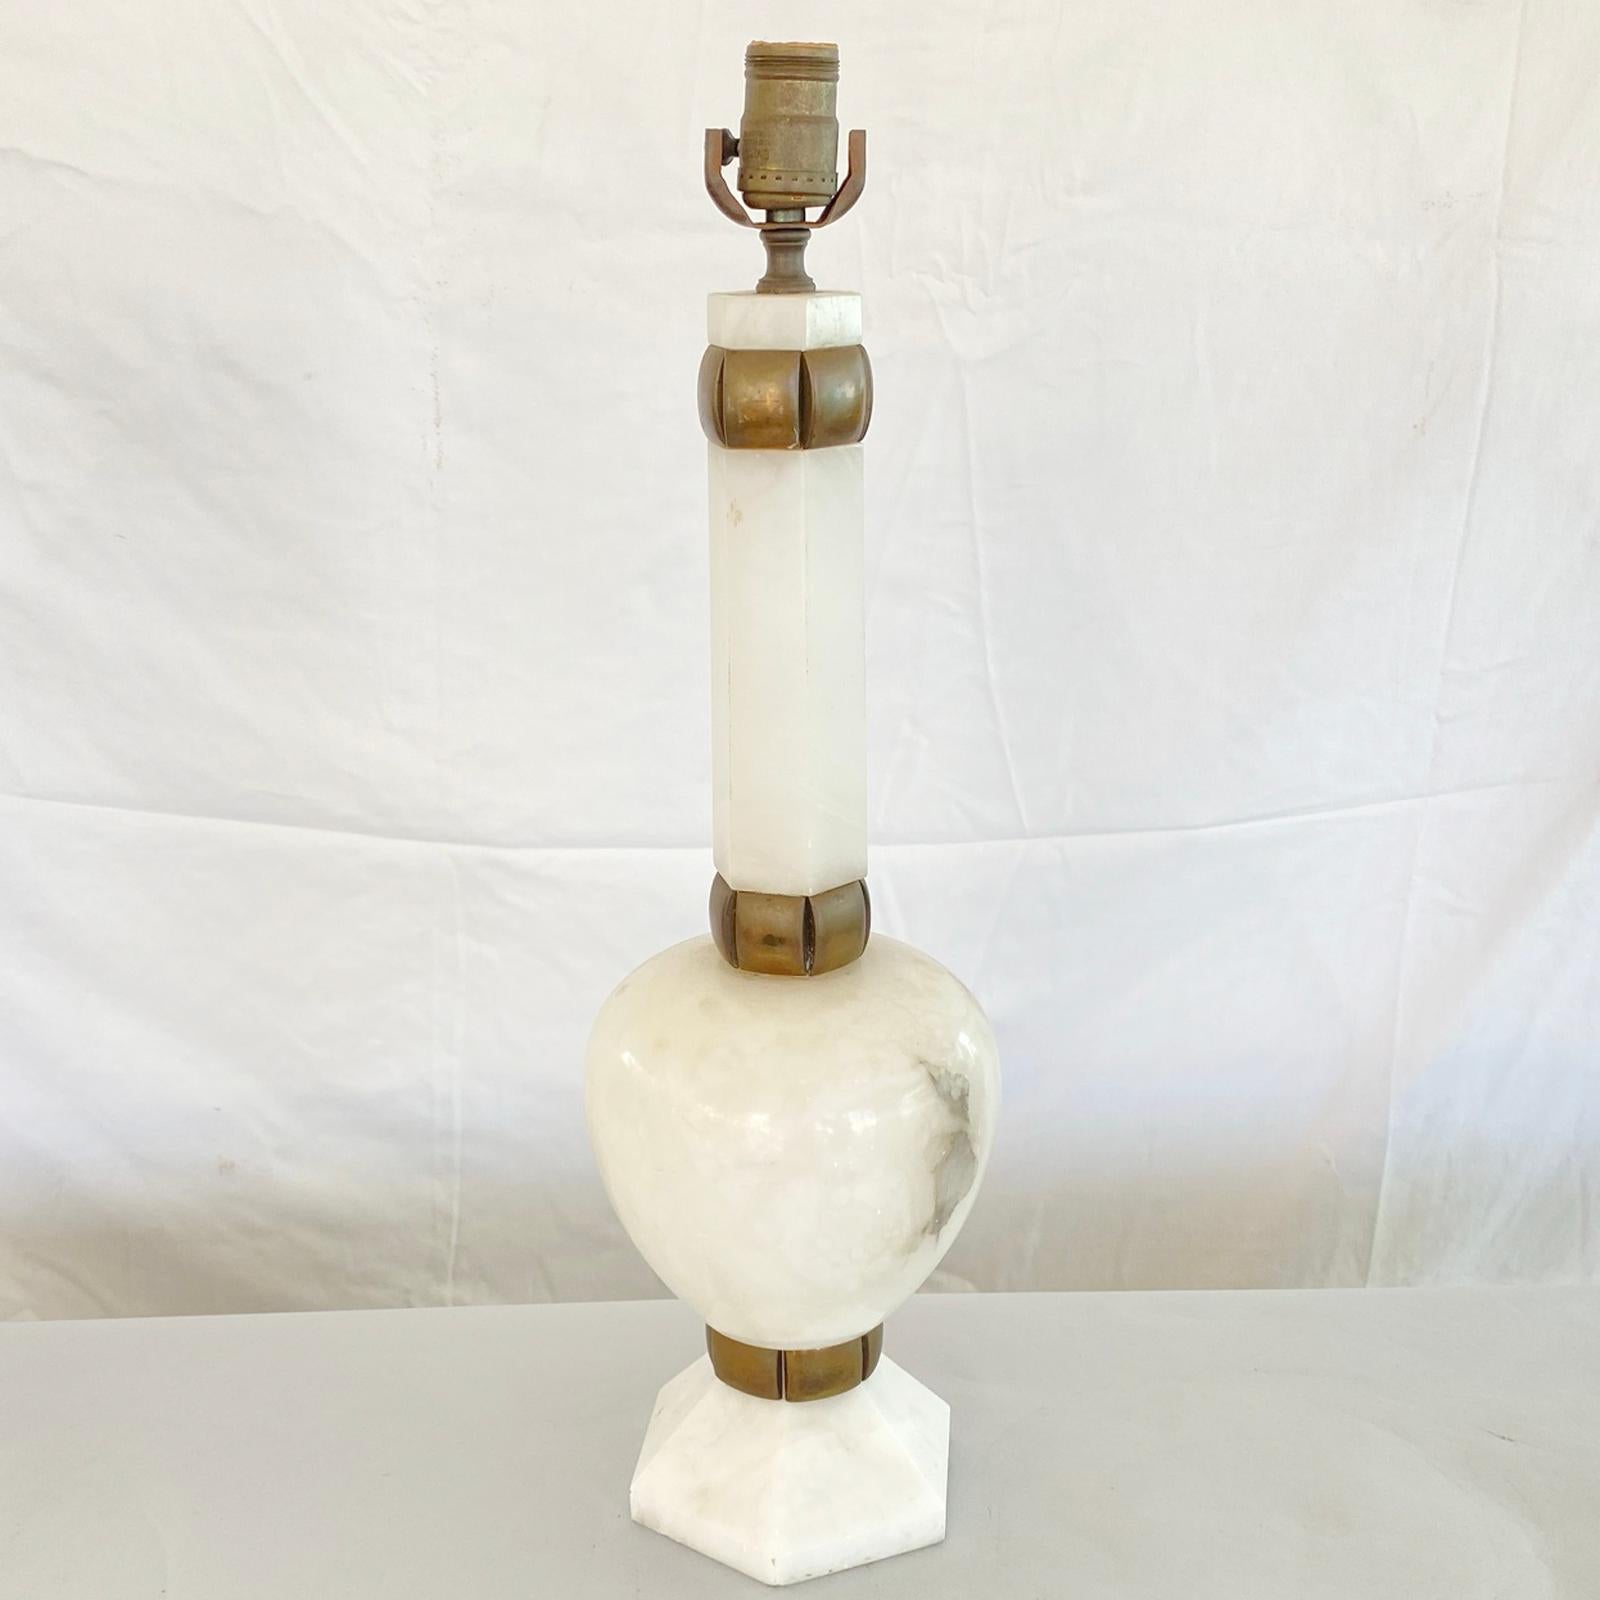 Single Hollywood Regency lamp of alabaster, having an ovoid body, with hexagonal neck and plinth, rounded brass collars adorn the joints of the neck and base, and have great patina. This lamp is very heavy, approximately 25 pounds. 

Stock ID: D2991 